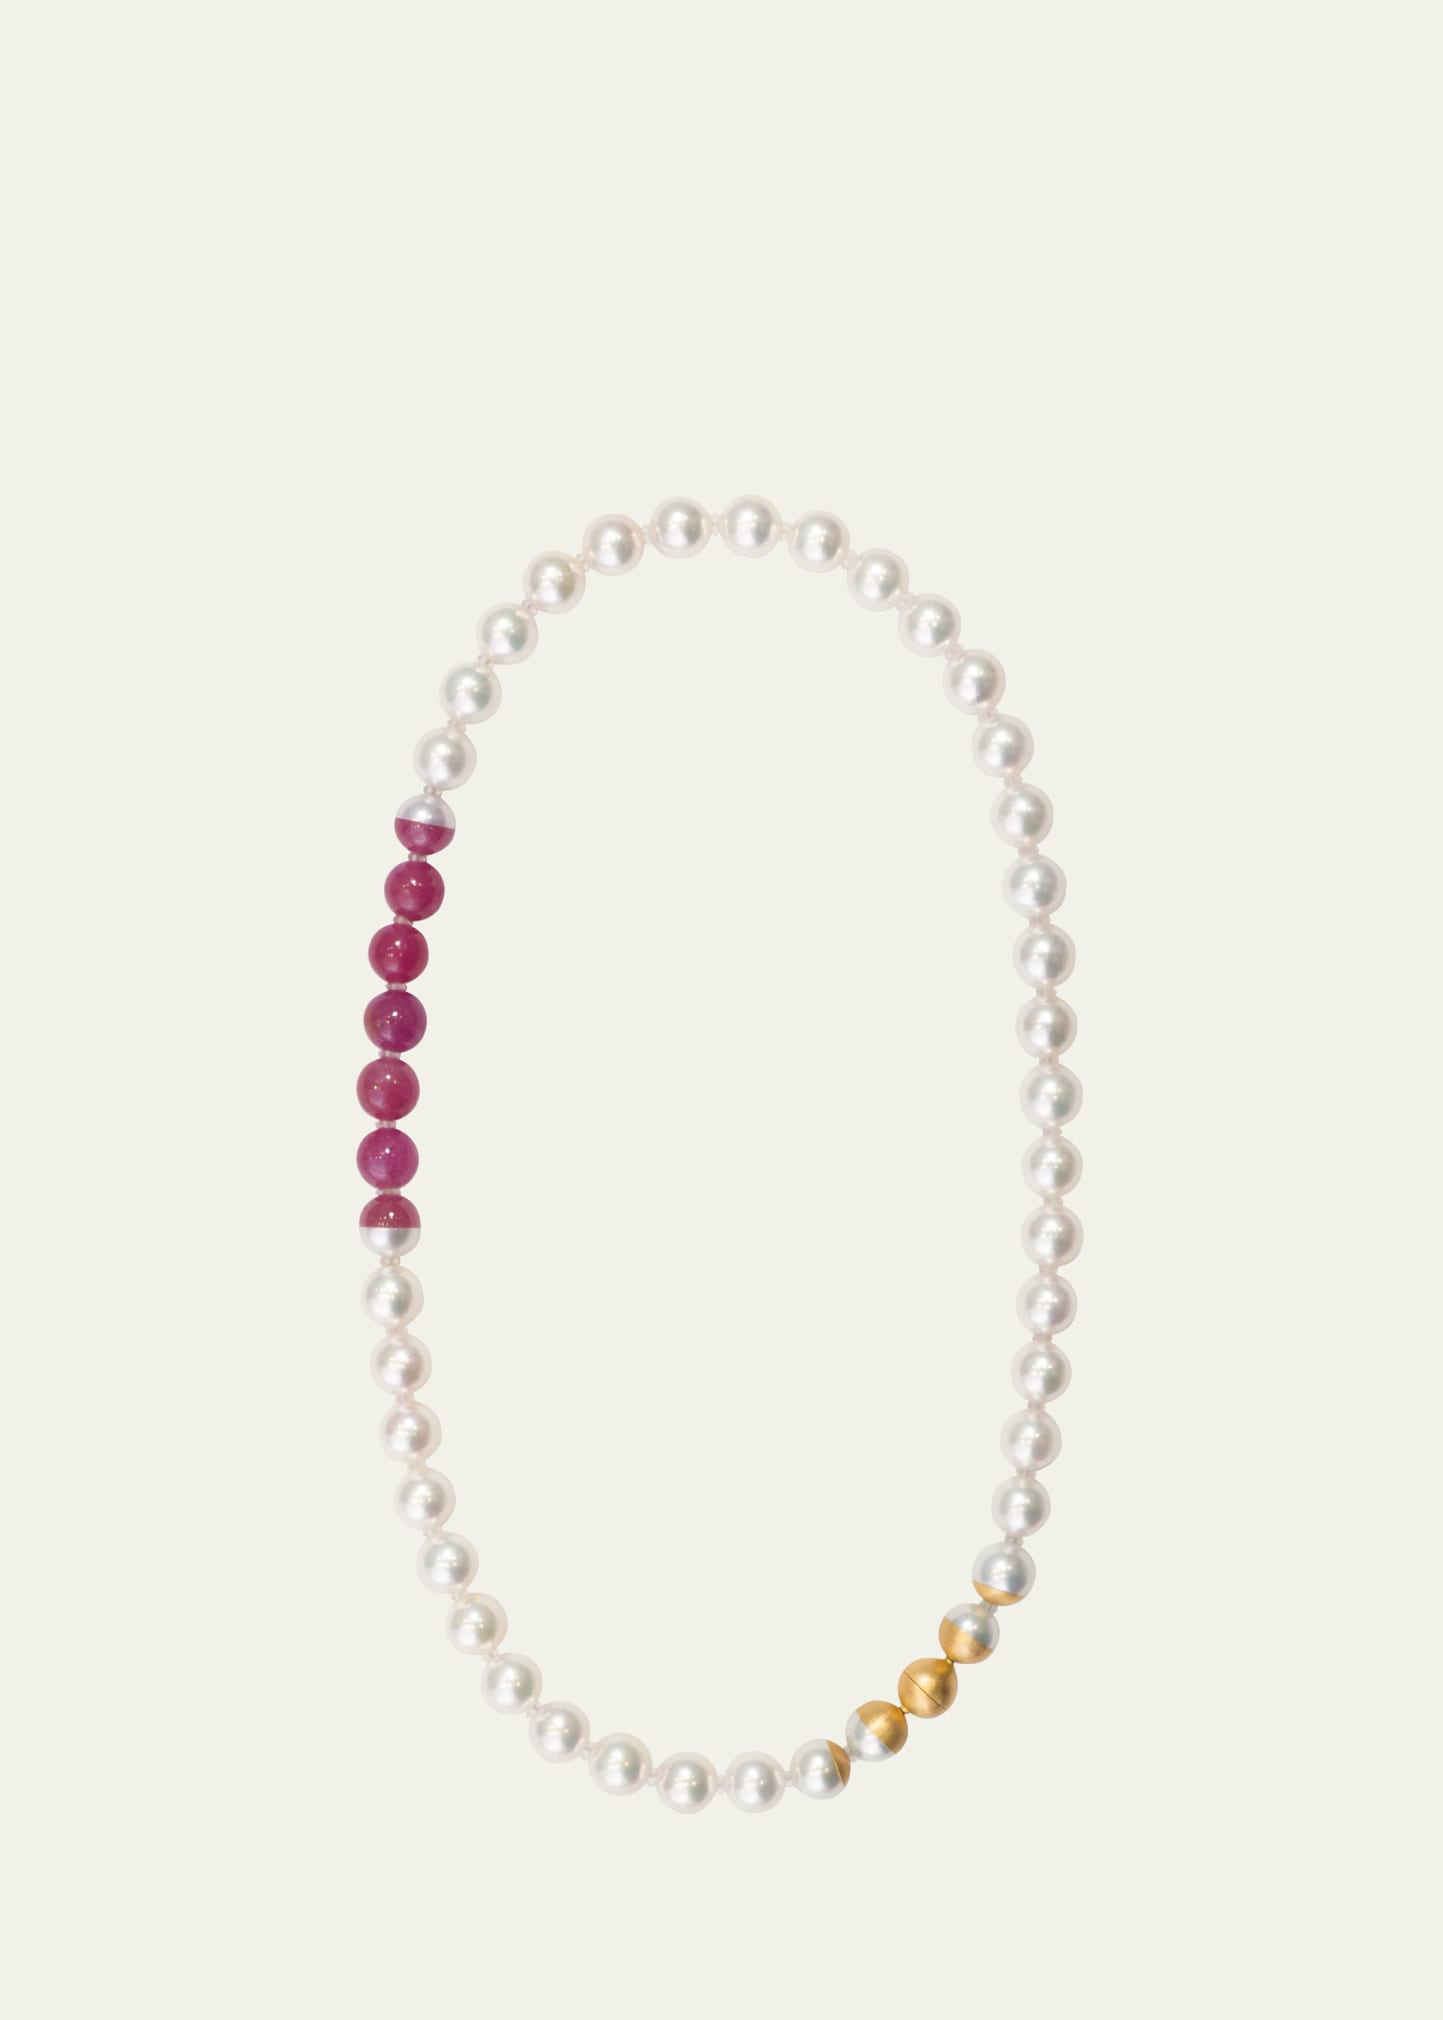 Yutai 18k Yellow Gold Sectional Pearl Necklace With Cultured Akoya Pearls And Pink Sapphires In Neutral